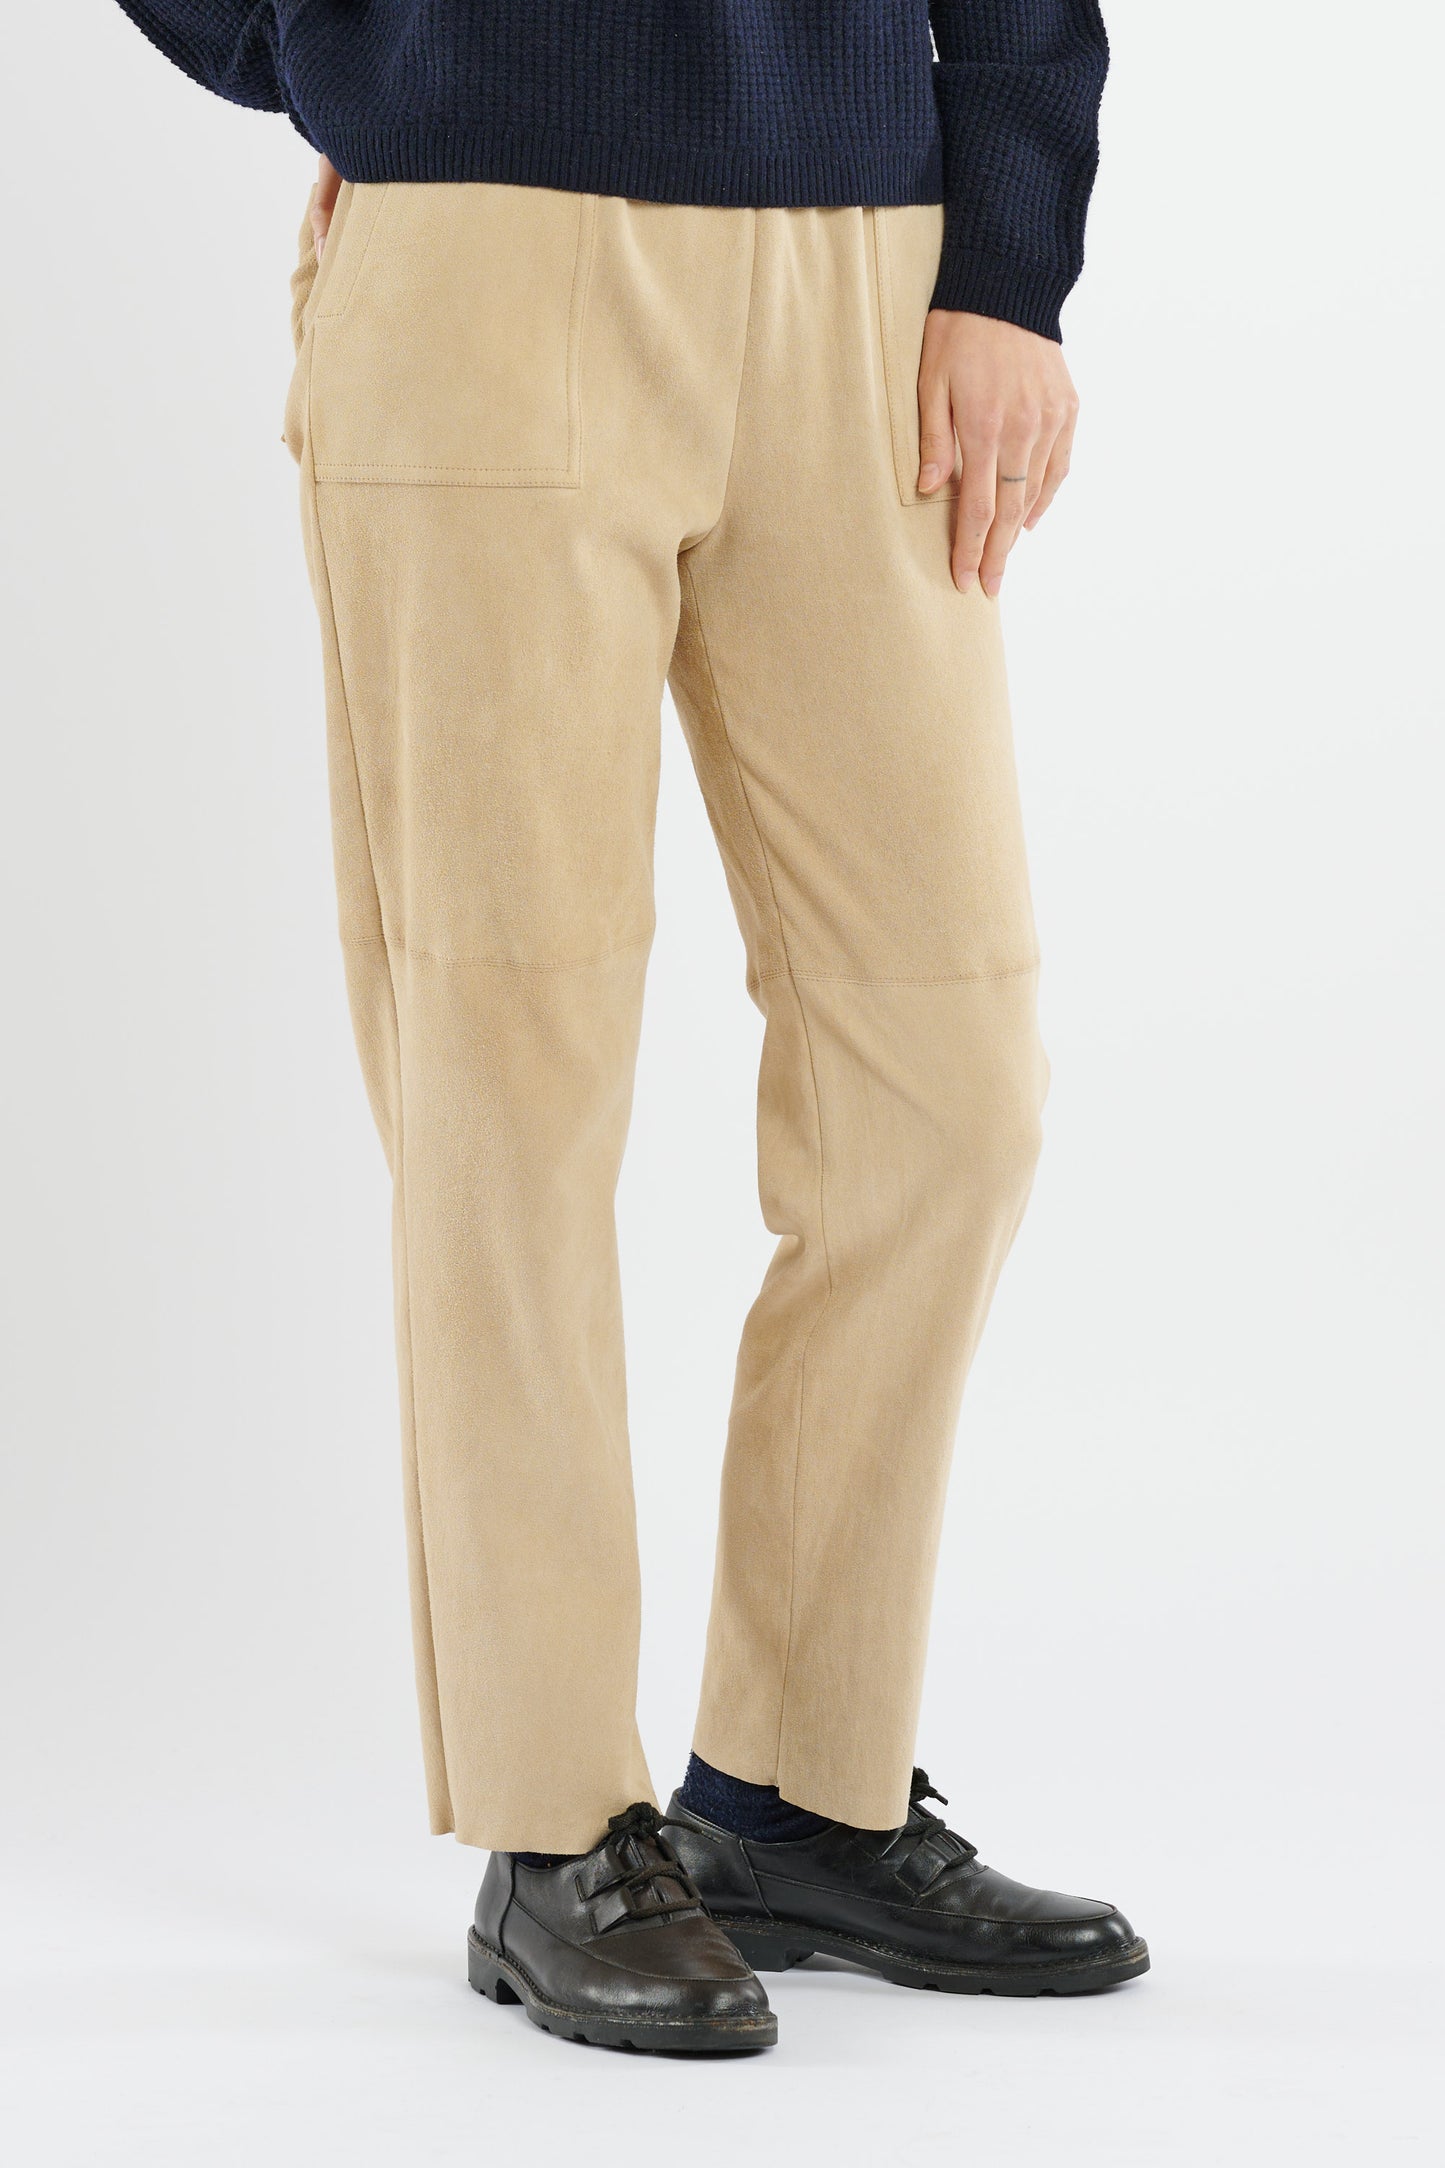 LEATHER STRETCH LOOSE PANTS BEIGE